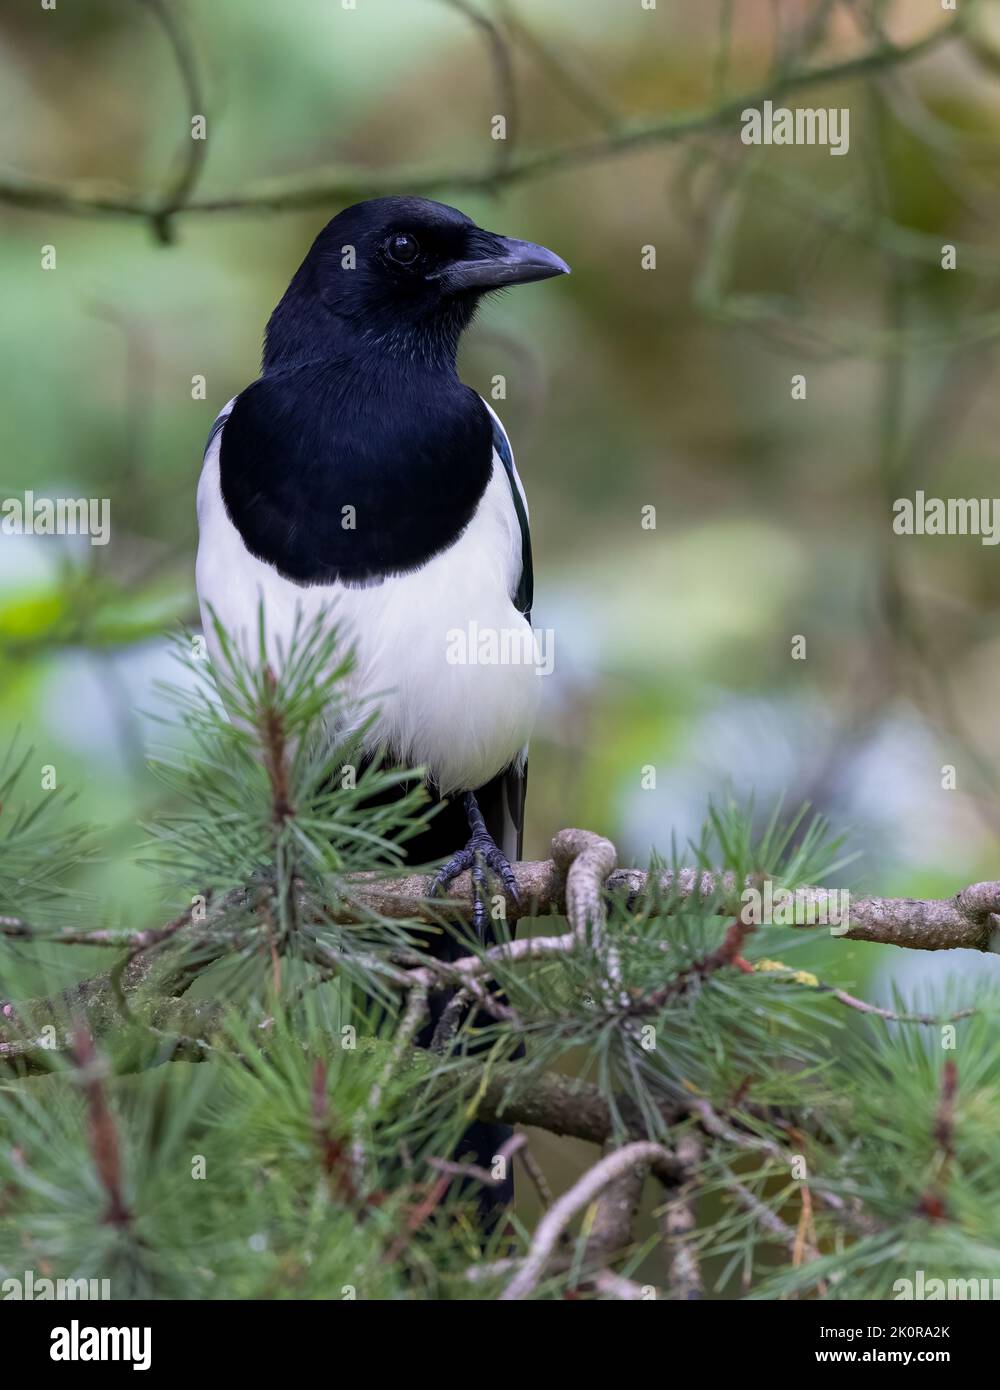 A beautiful Magpie, (Pica pica), perched on a Pine branch Stock Photo